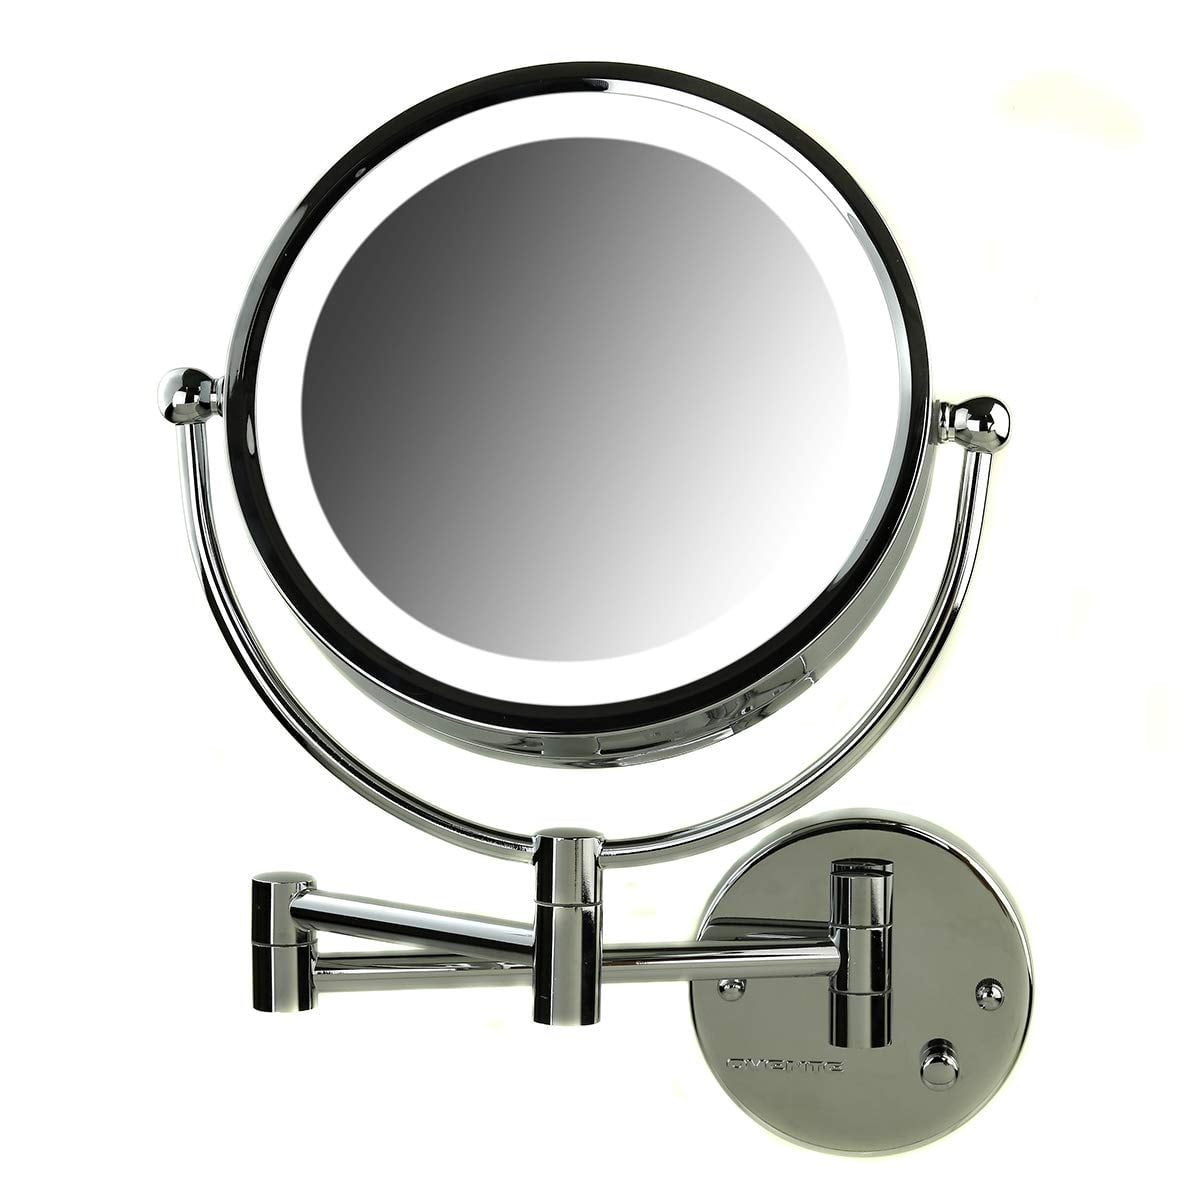 Ovente Lighted Wall Mounted Makeup, Lighted Magnified Makeup Mirror Wall Mounted